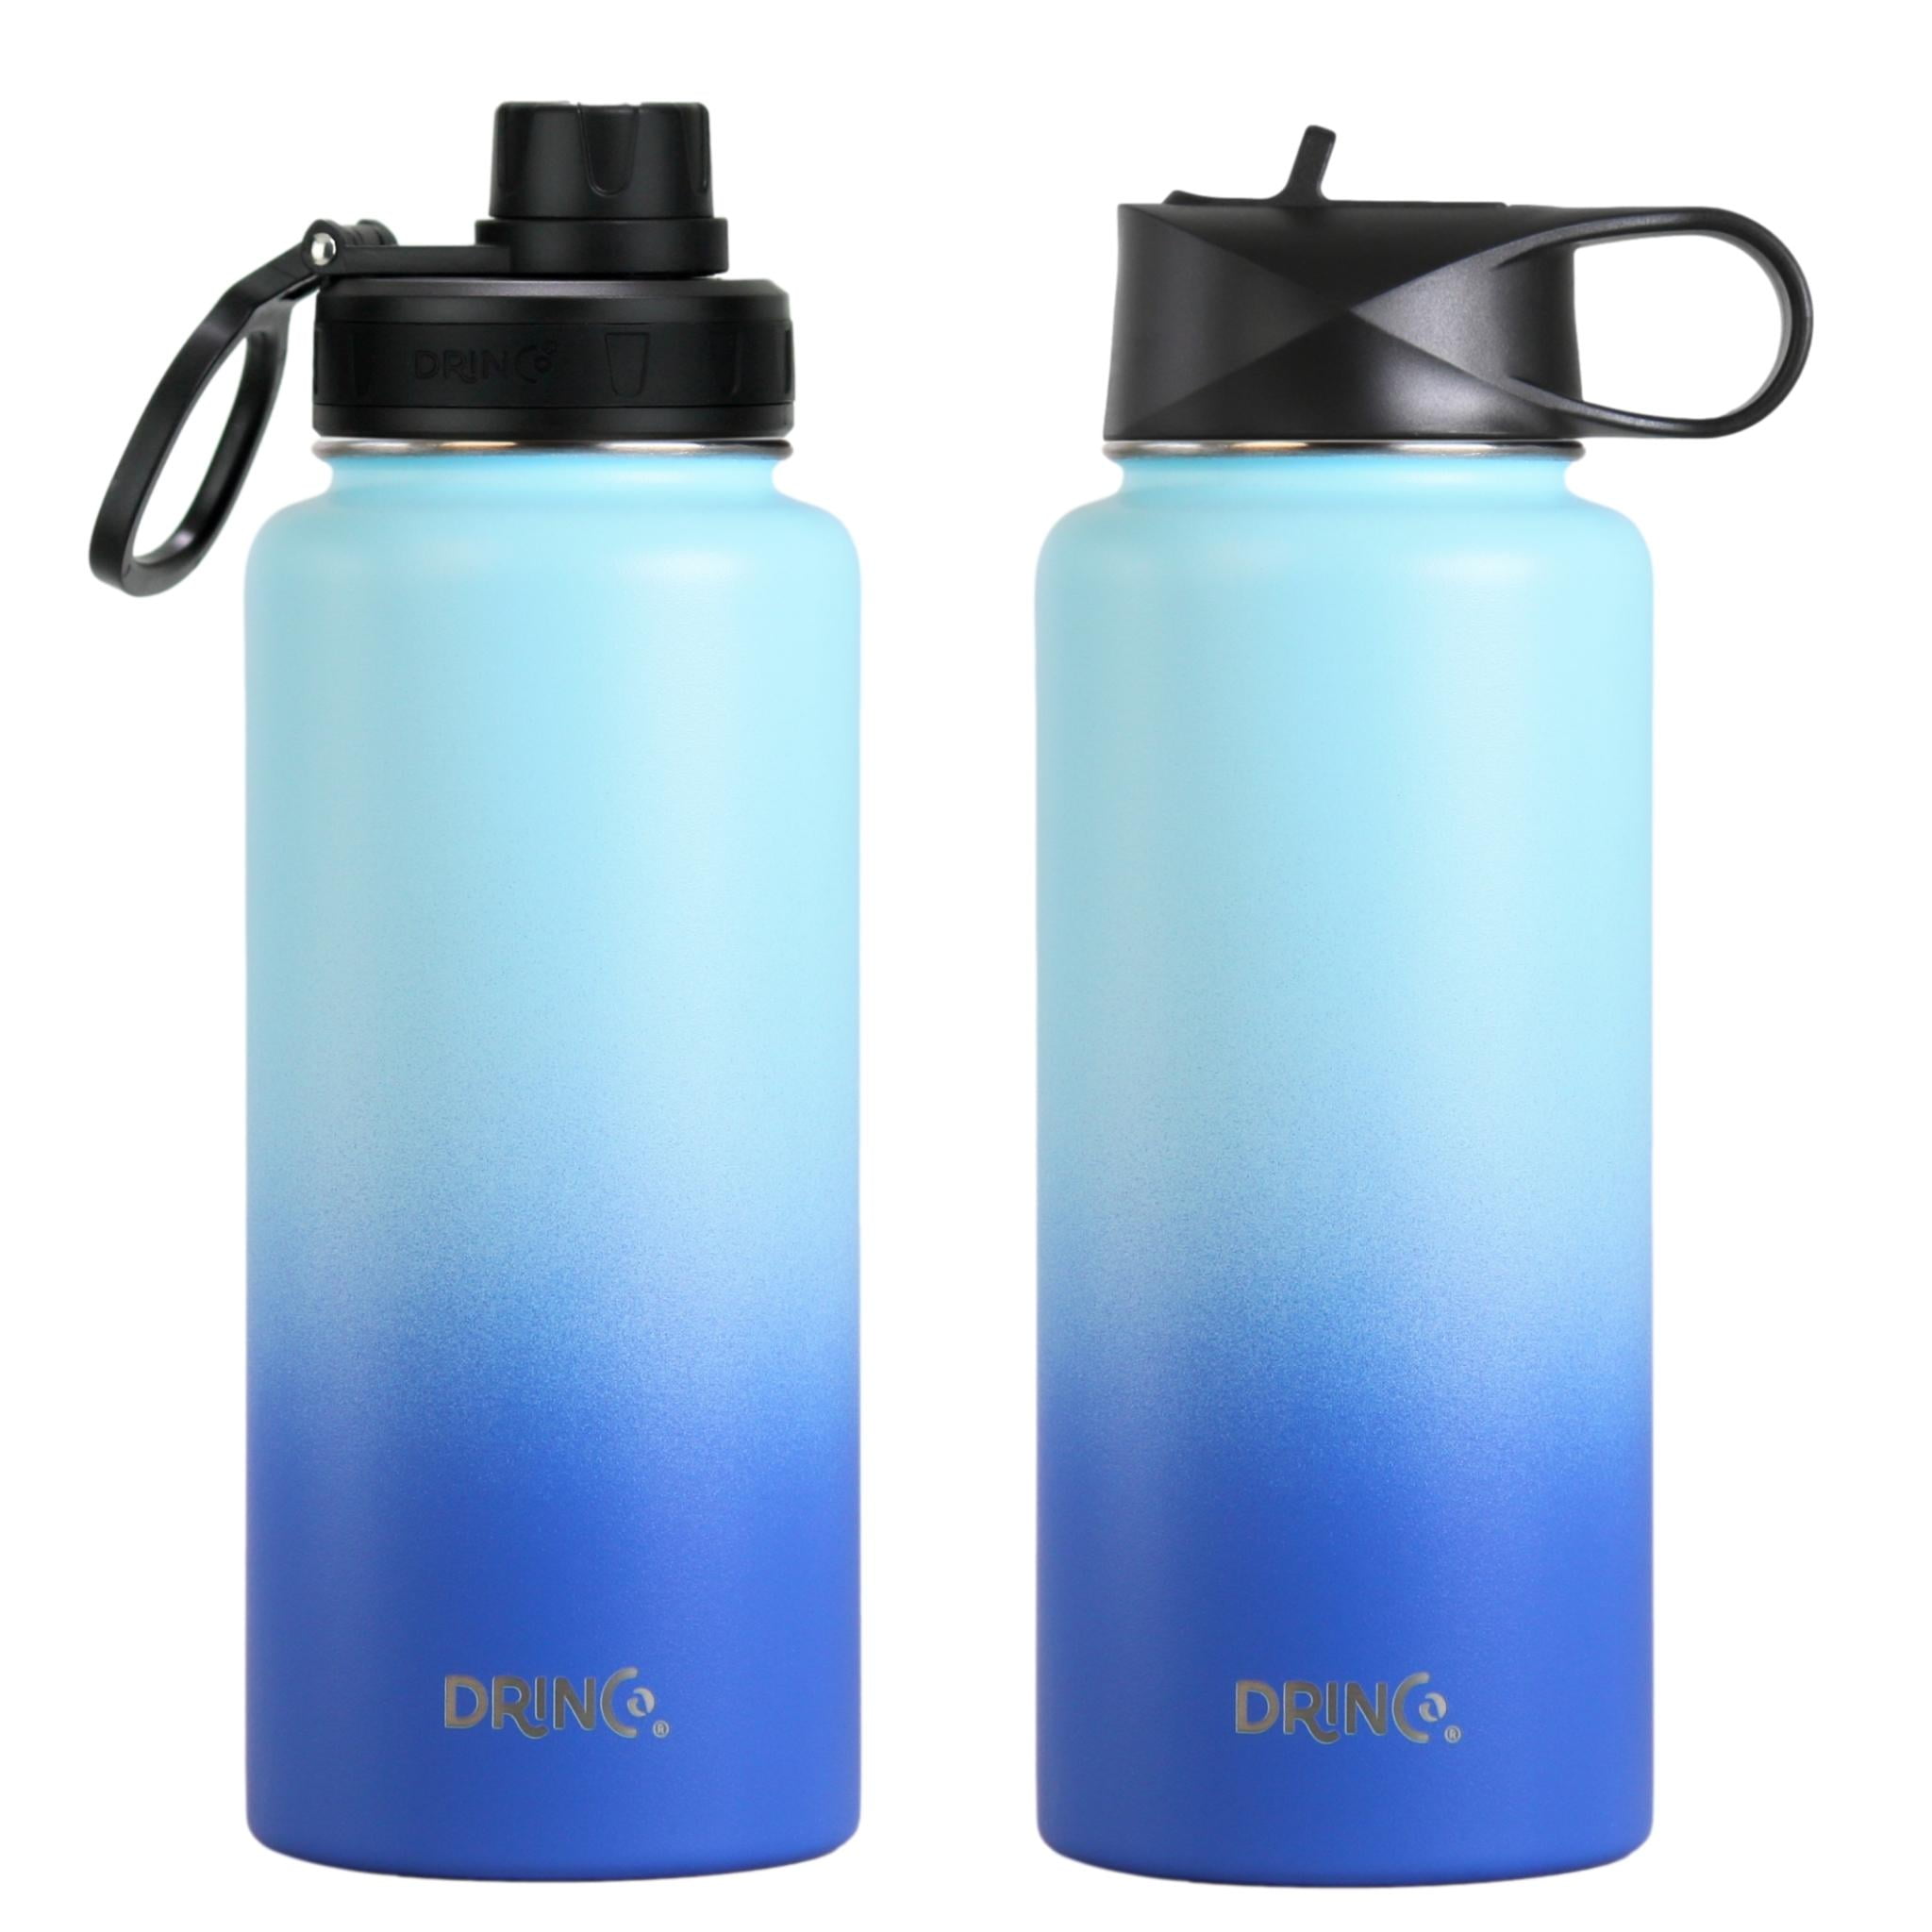 GreEco Double Wall Vacuum Flask, Insulated 18/8 Stainless Steel Water  Bottle, Hydration Bottle, 32 OZ, Light Blue